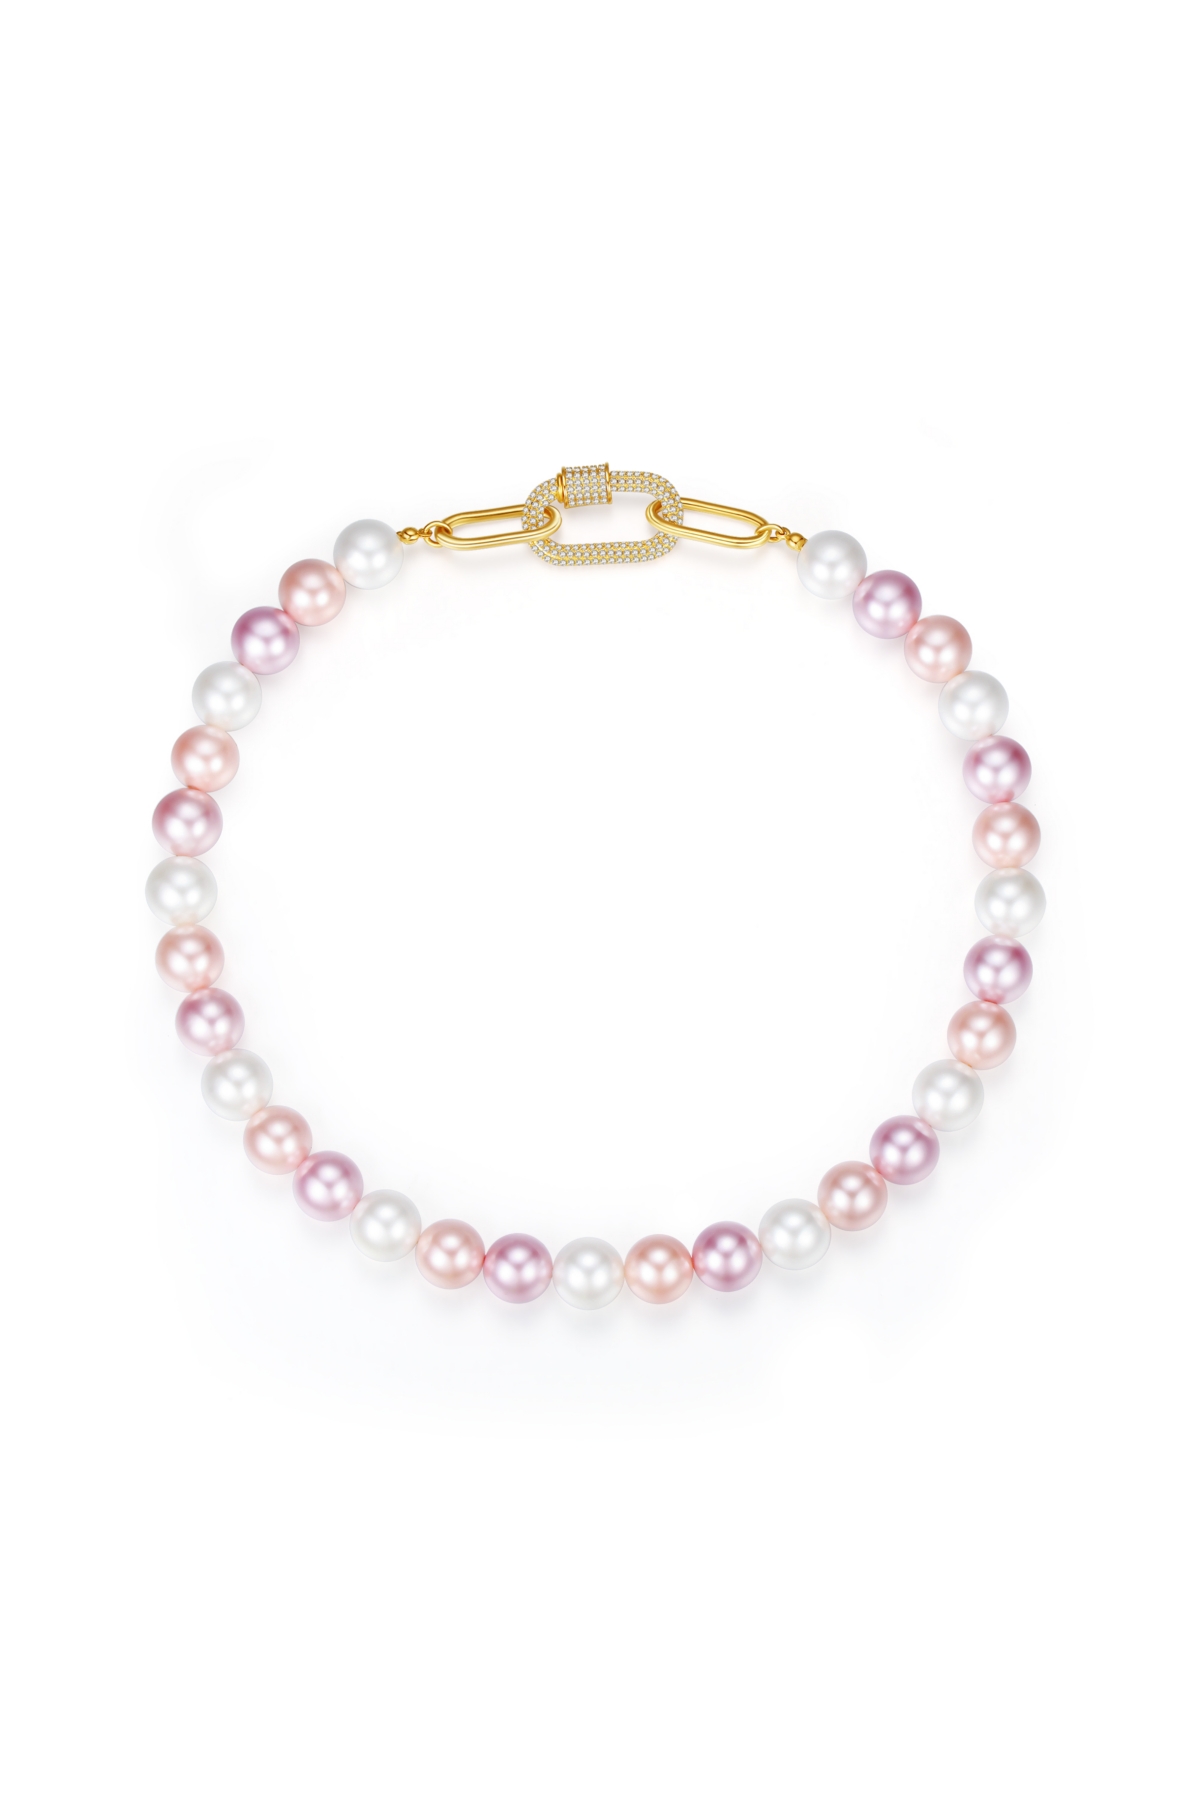 Shell Pearl Necklace with Gem-Encrusted Carabiner Lock (Large) - Pink